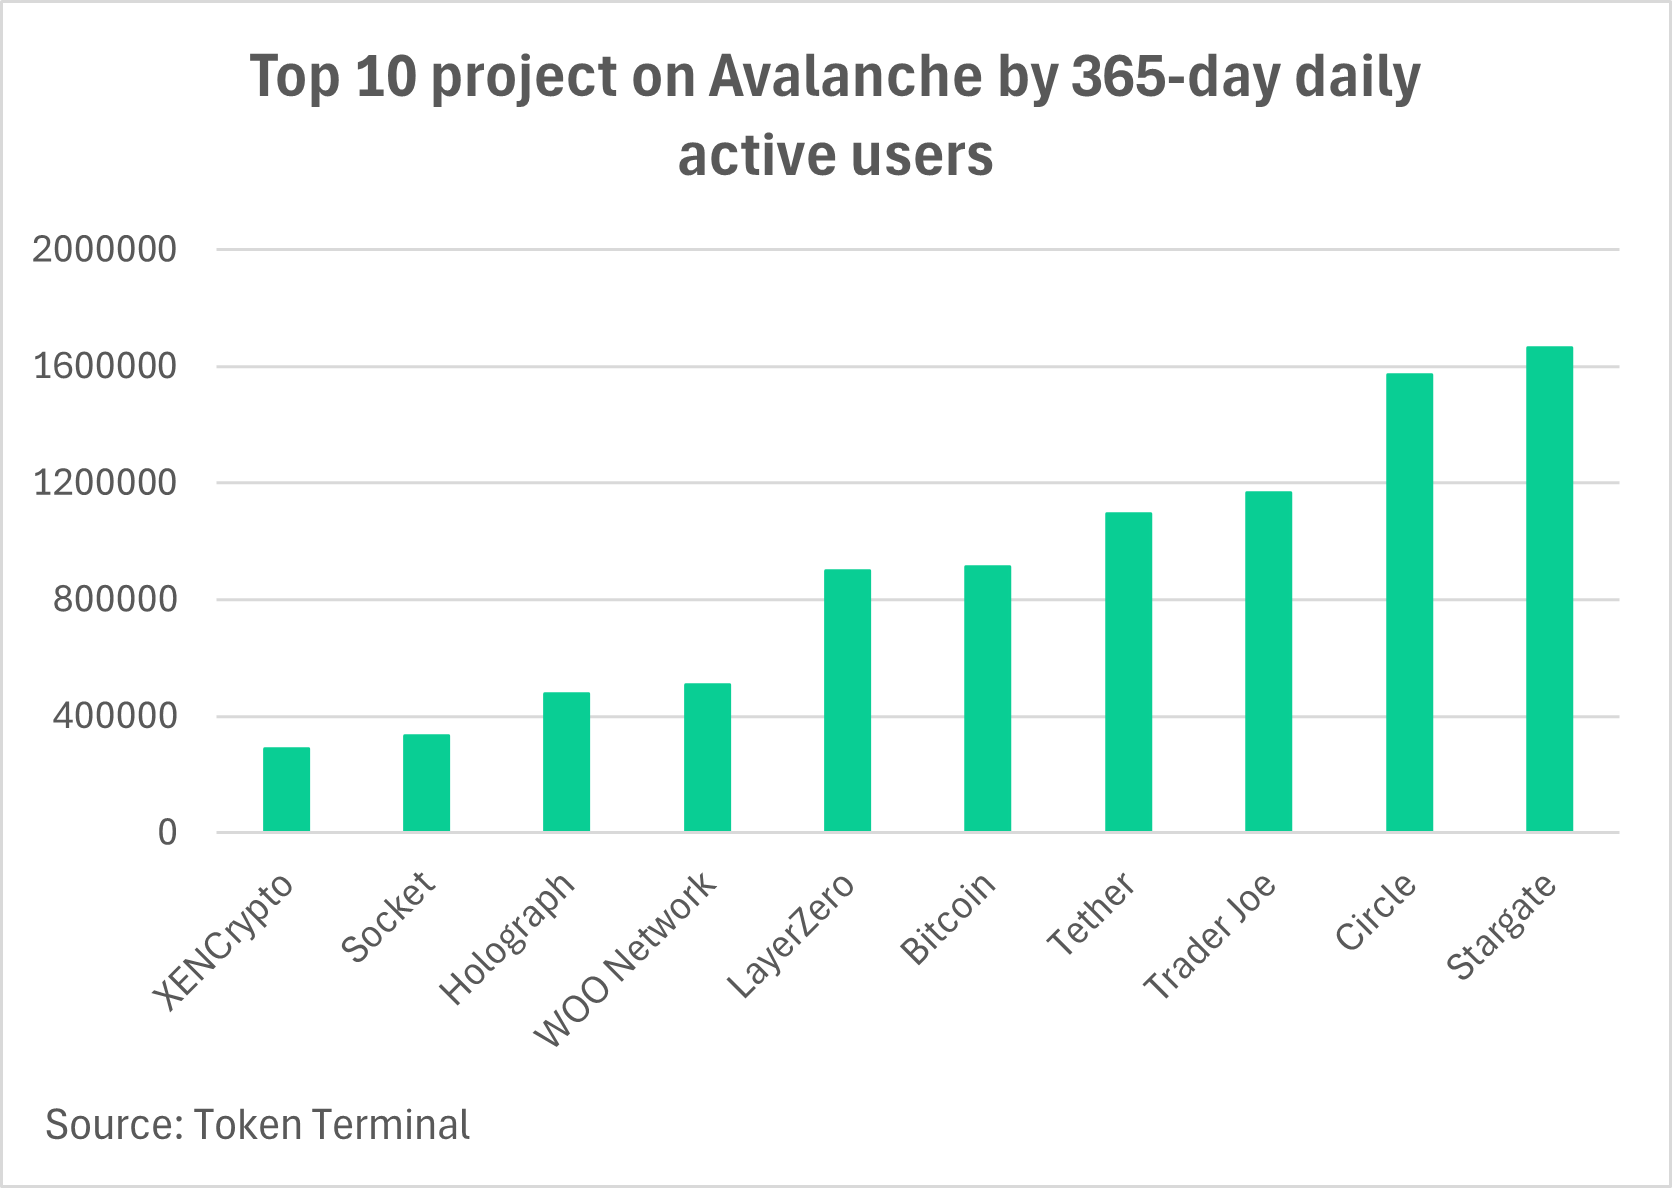 Top projects on Avalanche